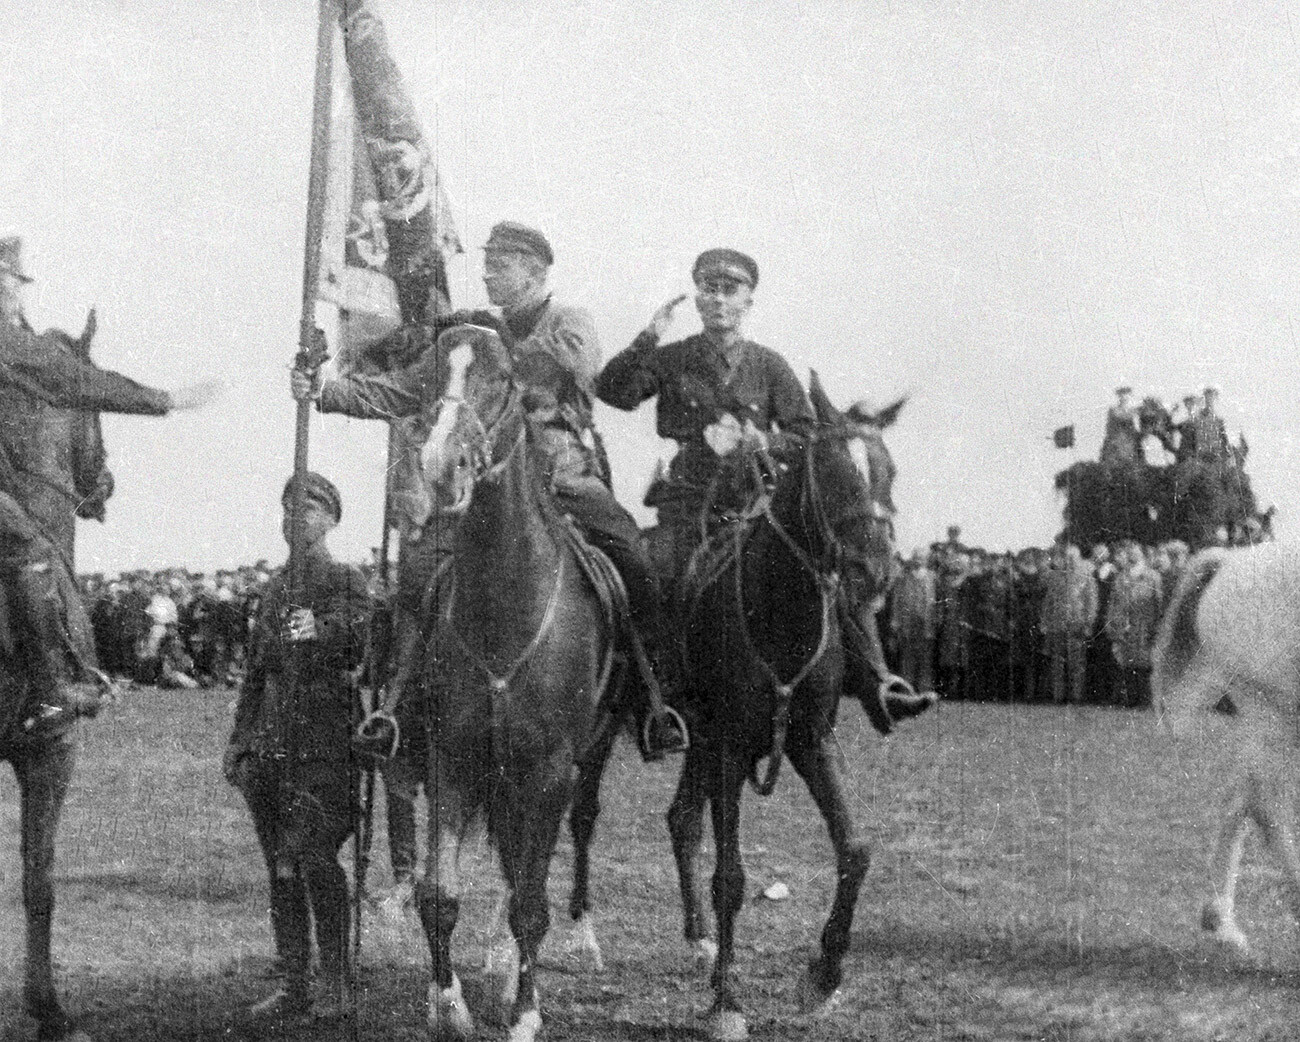 Mikhail Tukhachevsky passes the banner to the cavalry division of the Leningrad Military District.